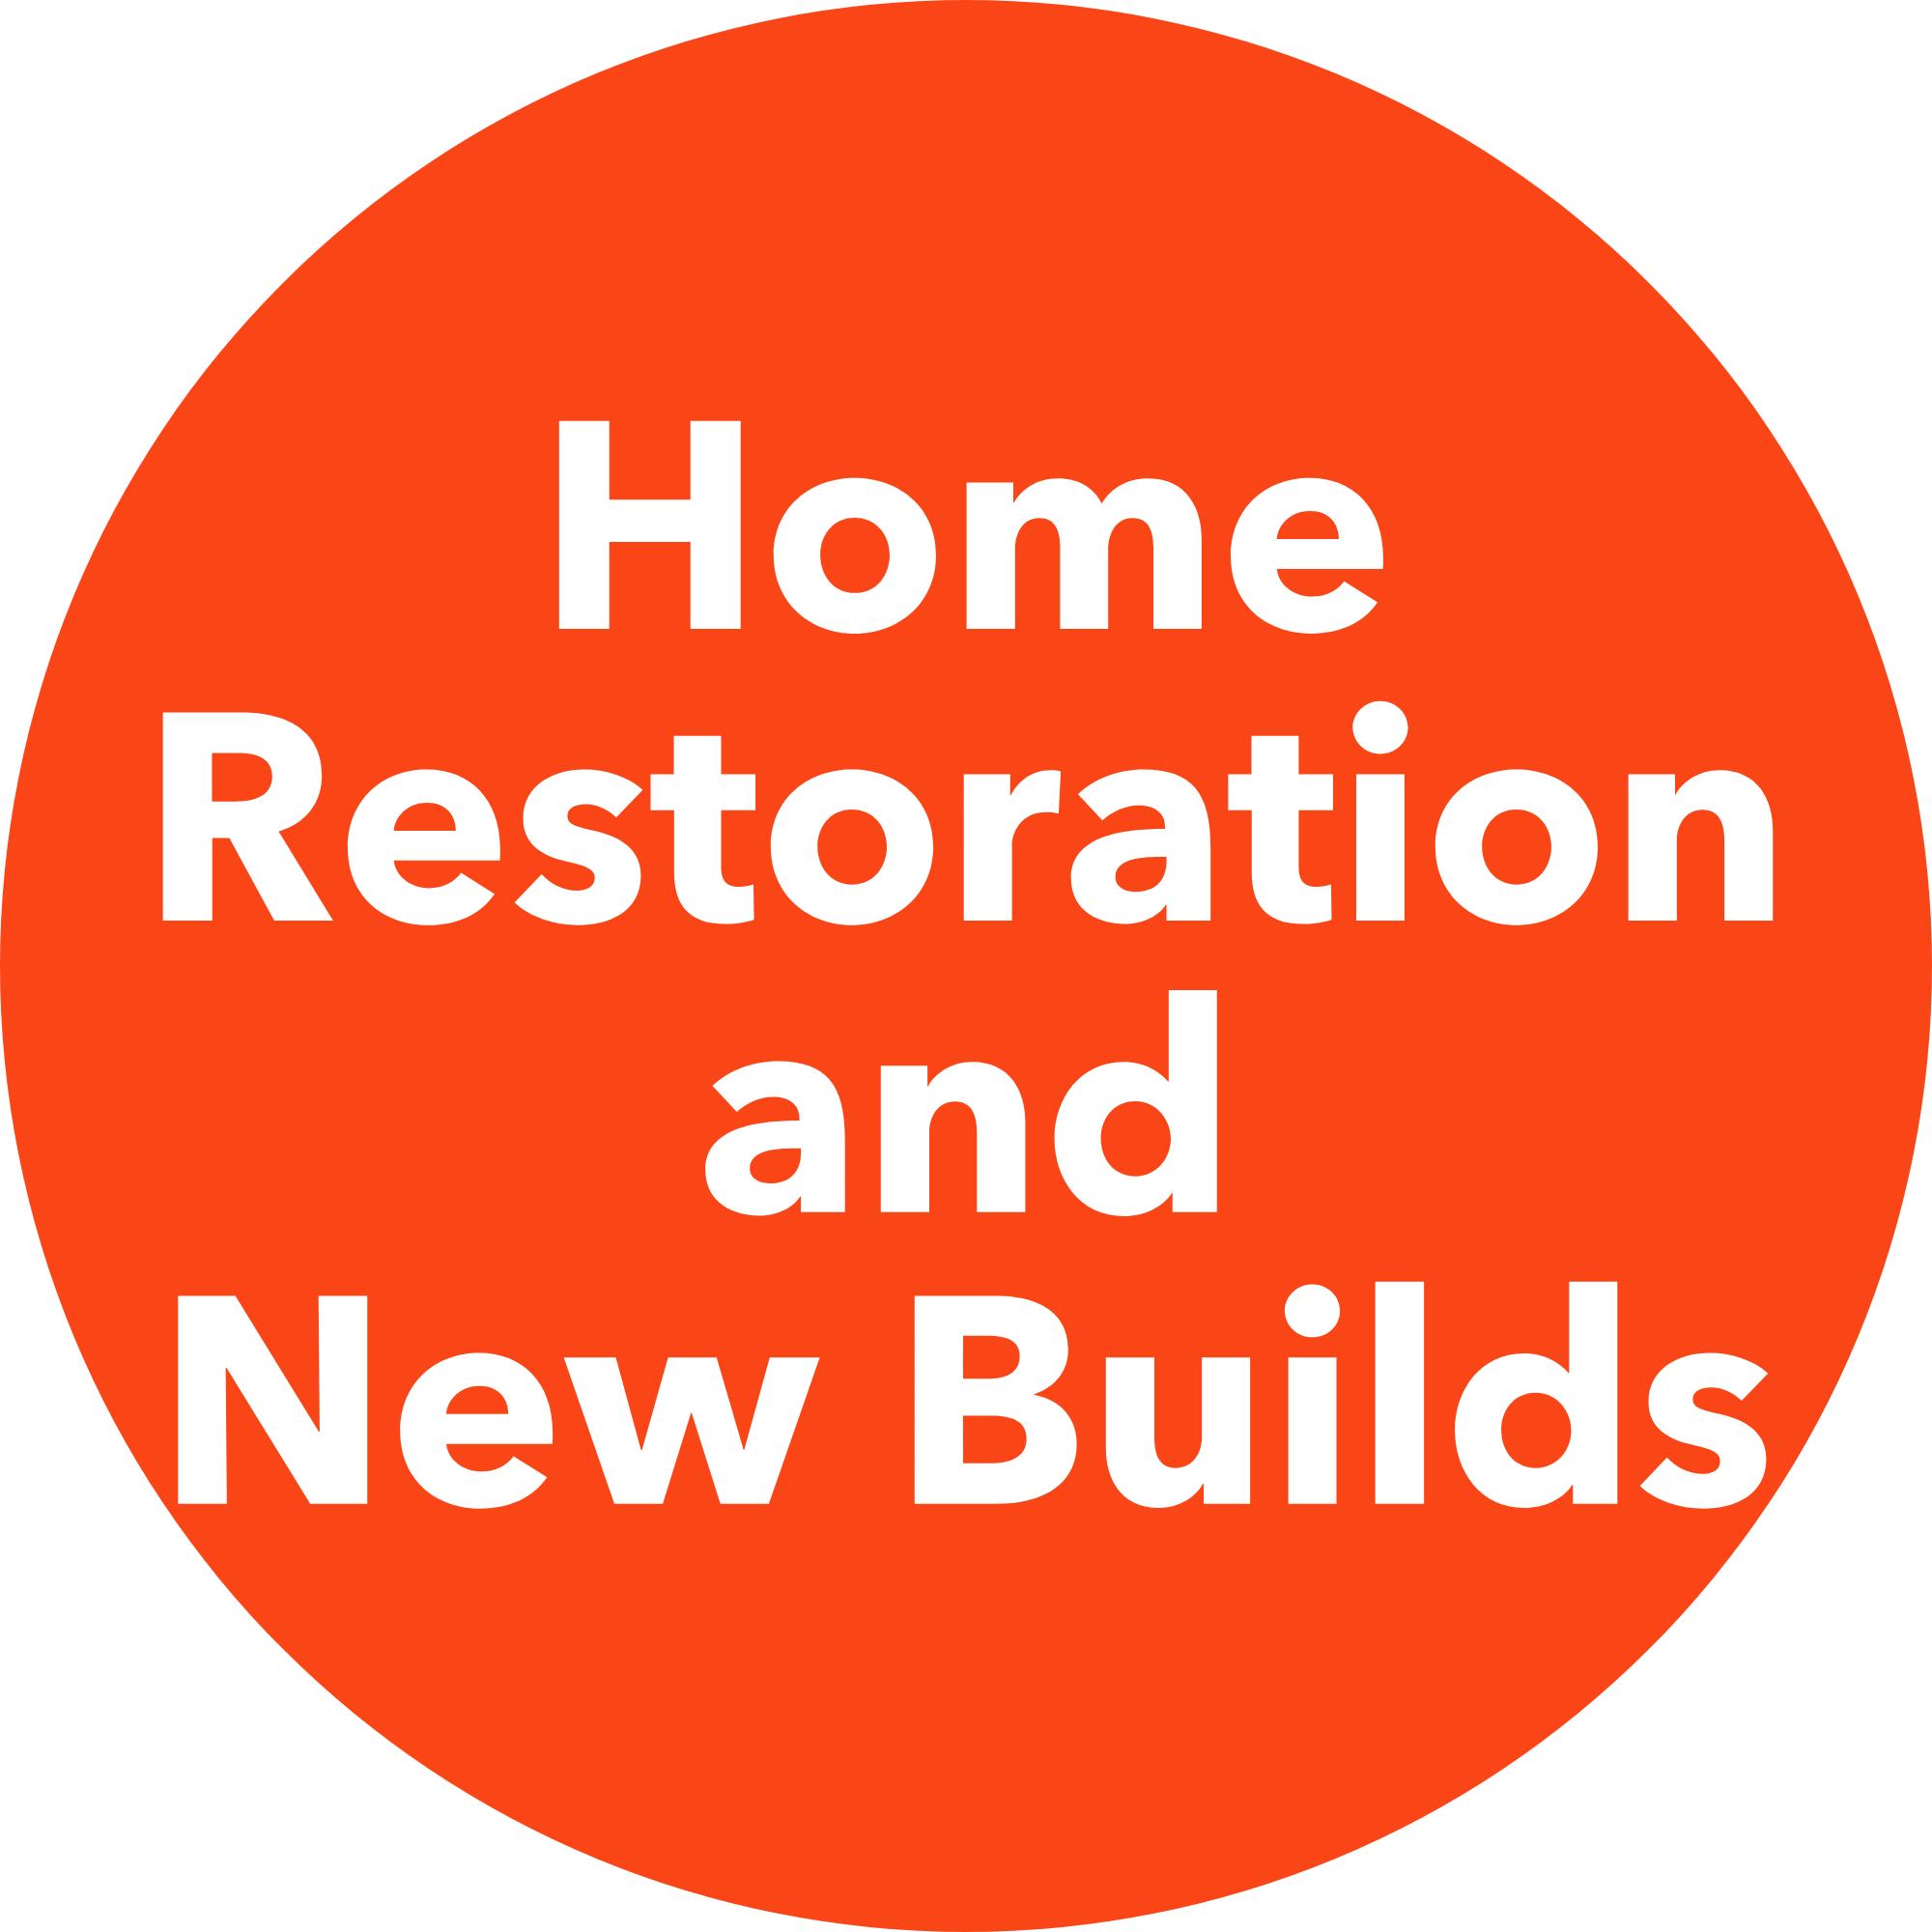 Home Restoration and New Builds